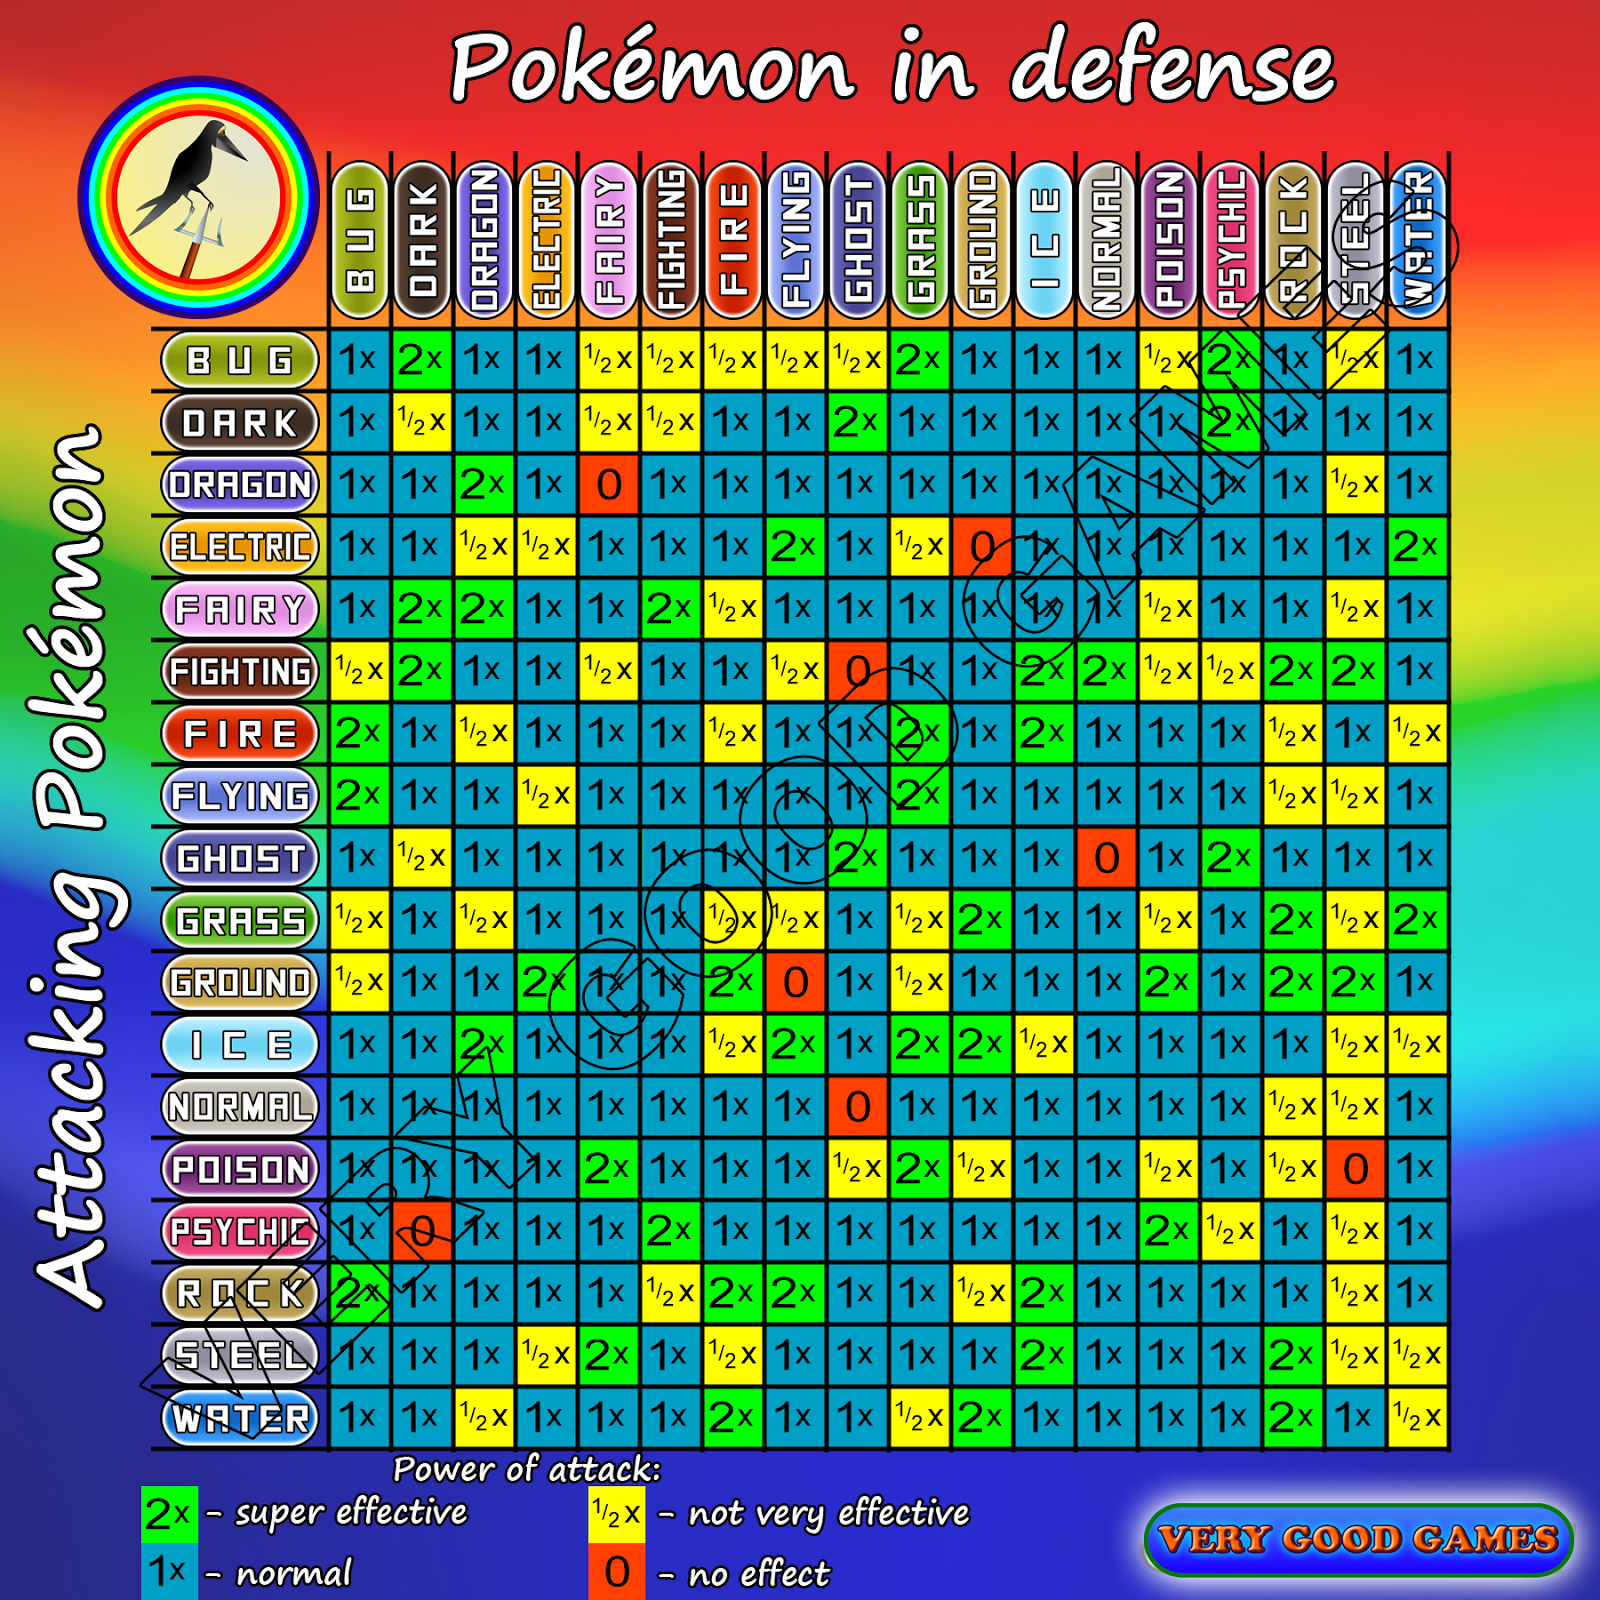 A table (chart) of Pokemon types and their powers and weaknesses towards each other during Pokemon Battles in the Pokemon Go game